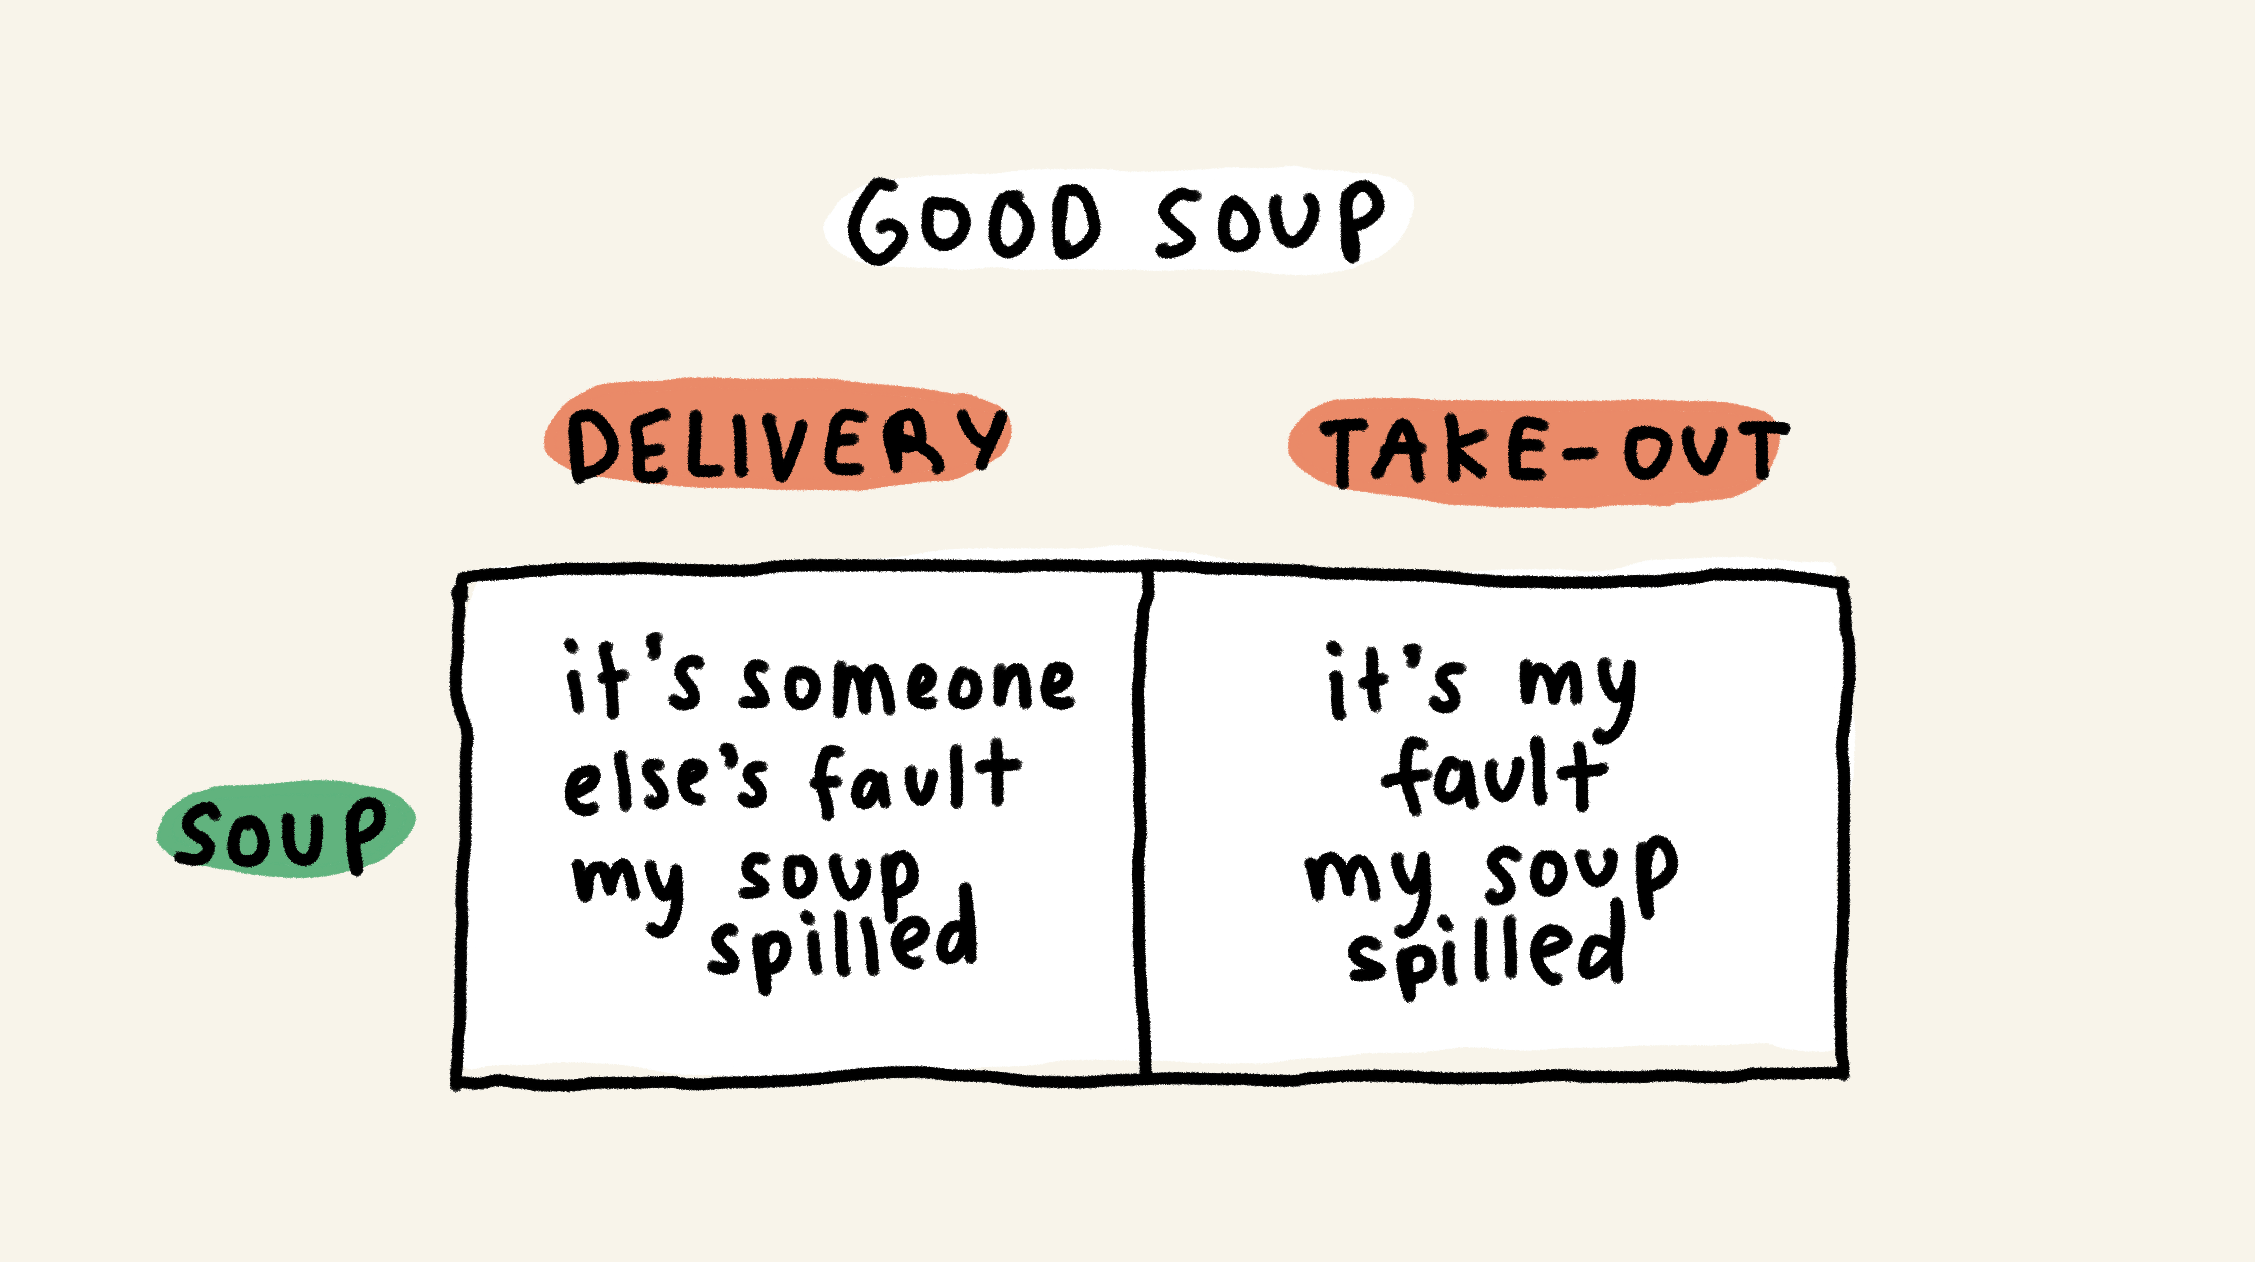 Good soup

Delivery + soup = it's someone else's fault my soup spilled
Take-out + soup = it's my fault my soup spilled